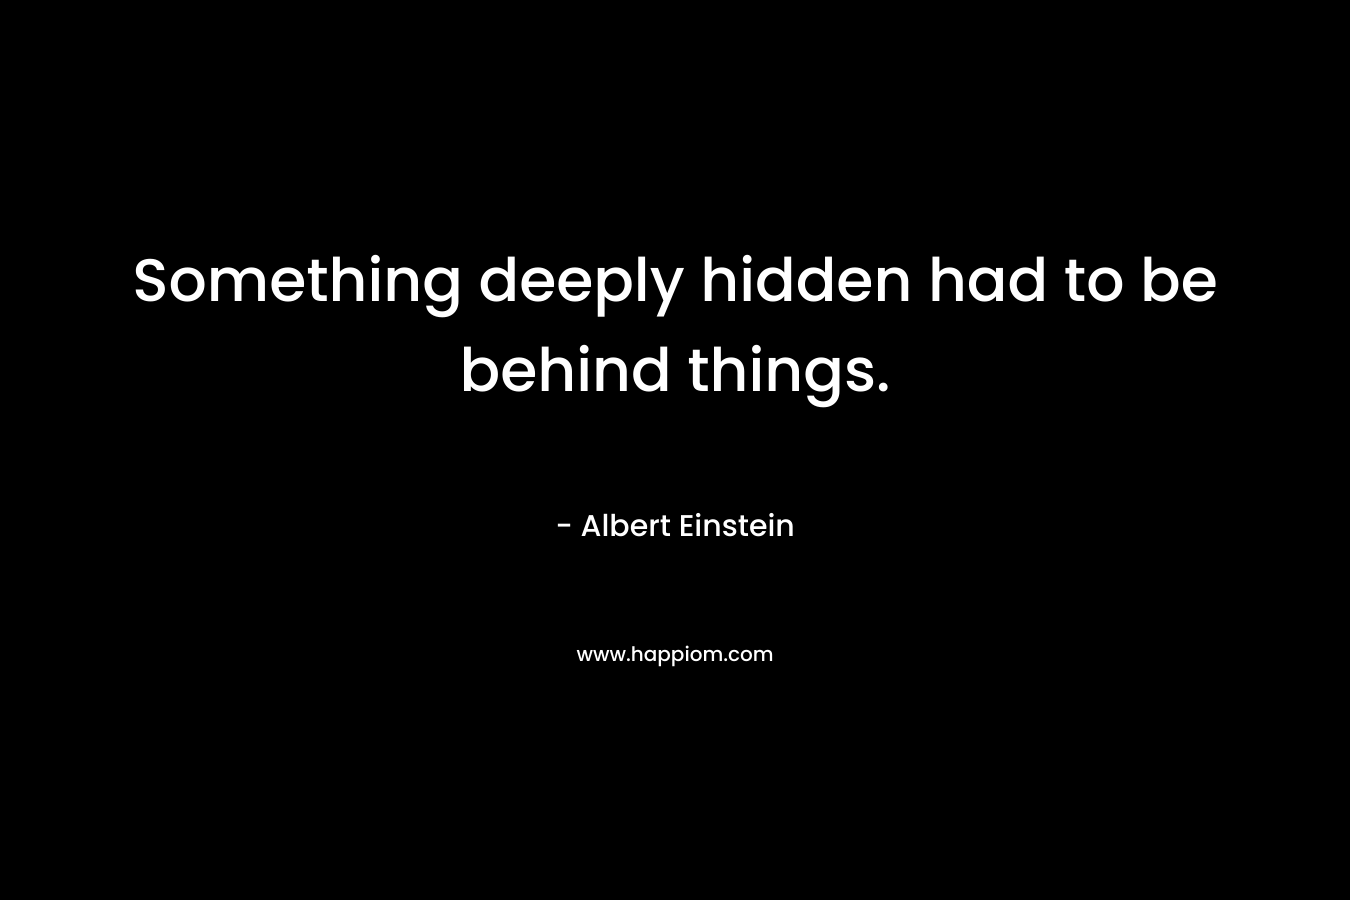 Something deeply hidden had to be behind things.